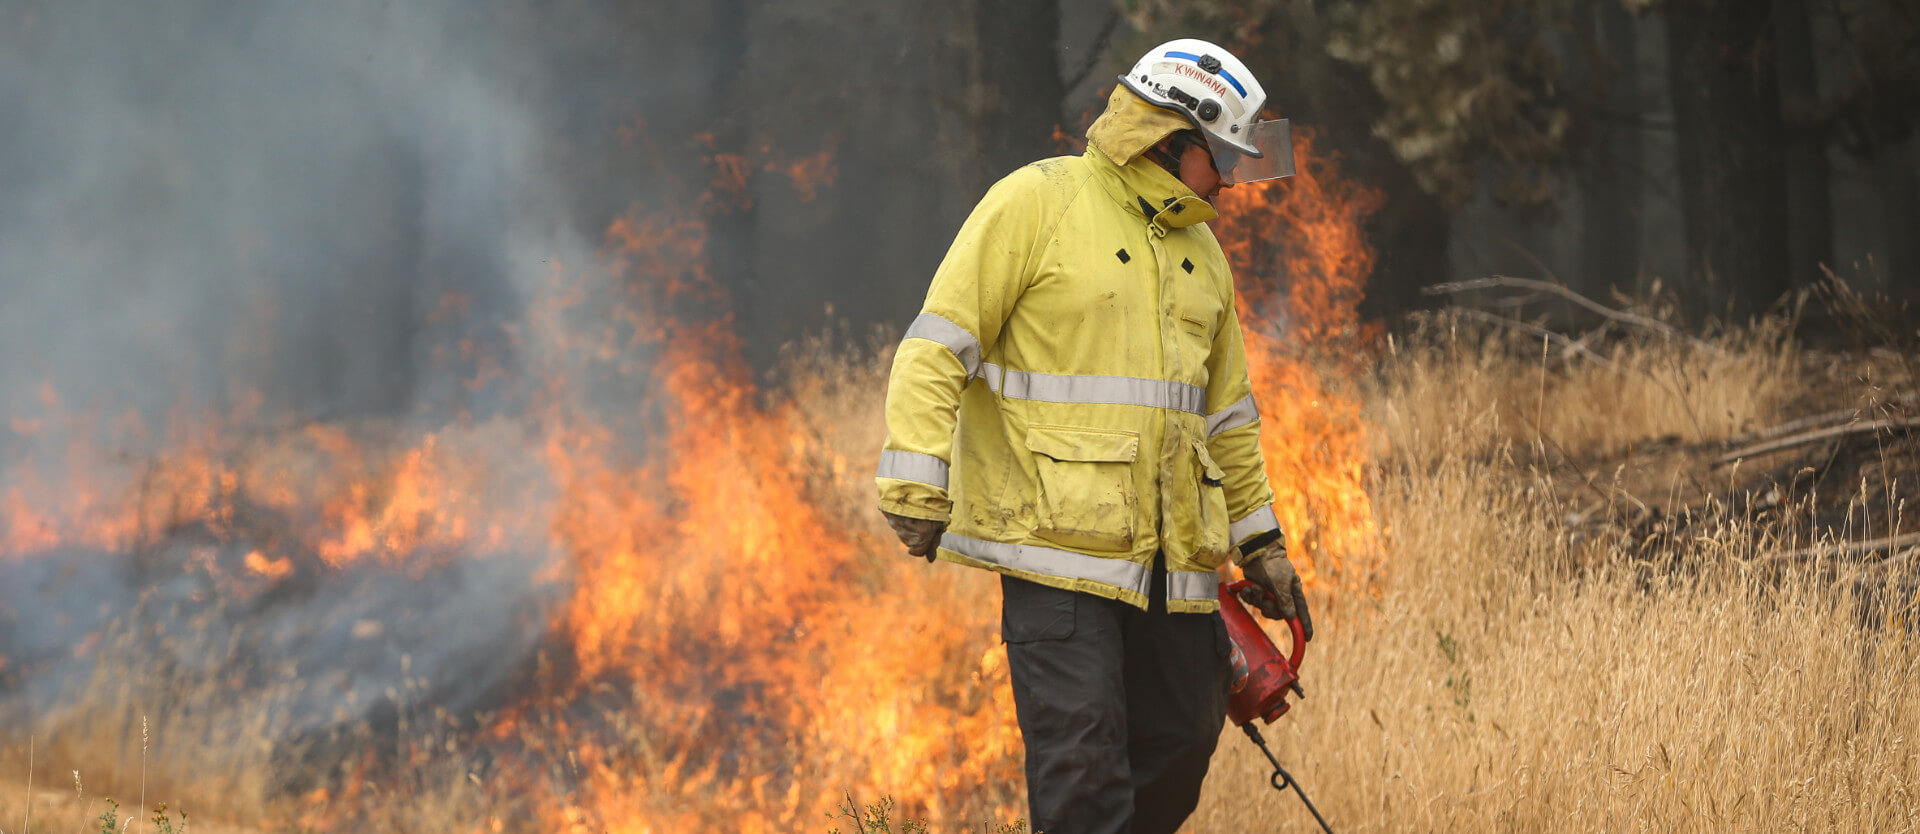 Firefighter creating firebreak with torch